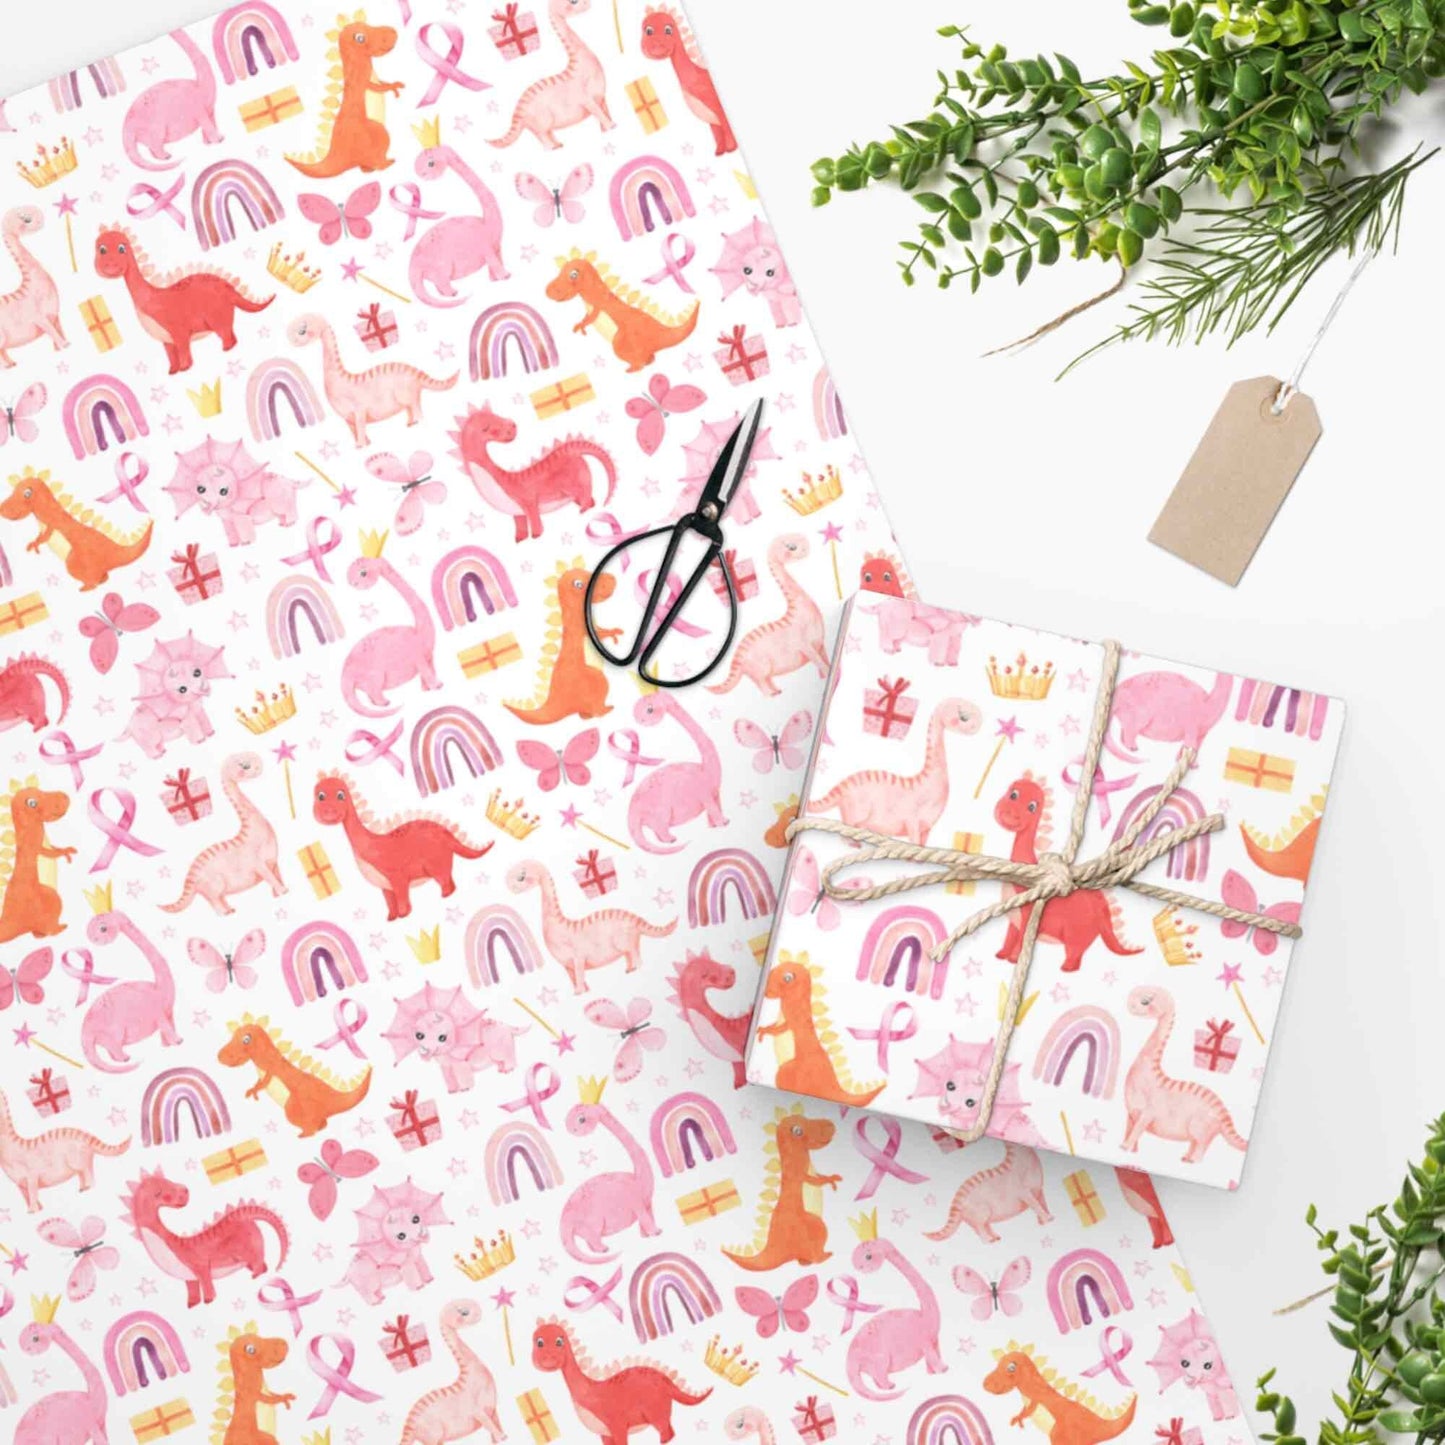 Girl Dinosaur Pink Breast Cancer Ribbon Gift Wrap Paper, Pink Wrapping Paper, Cancer Awareness Love Gift, Cancer Survivor Breast Cancer Gift